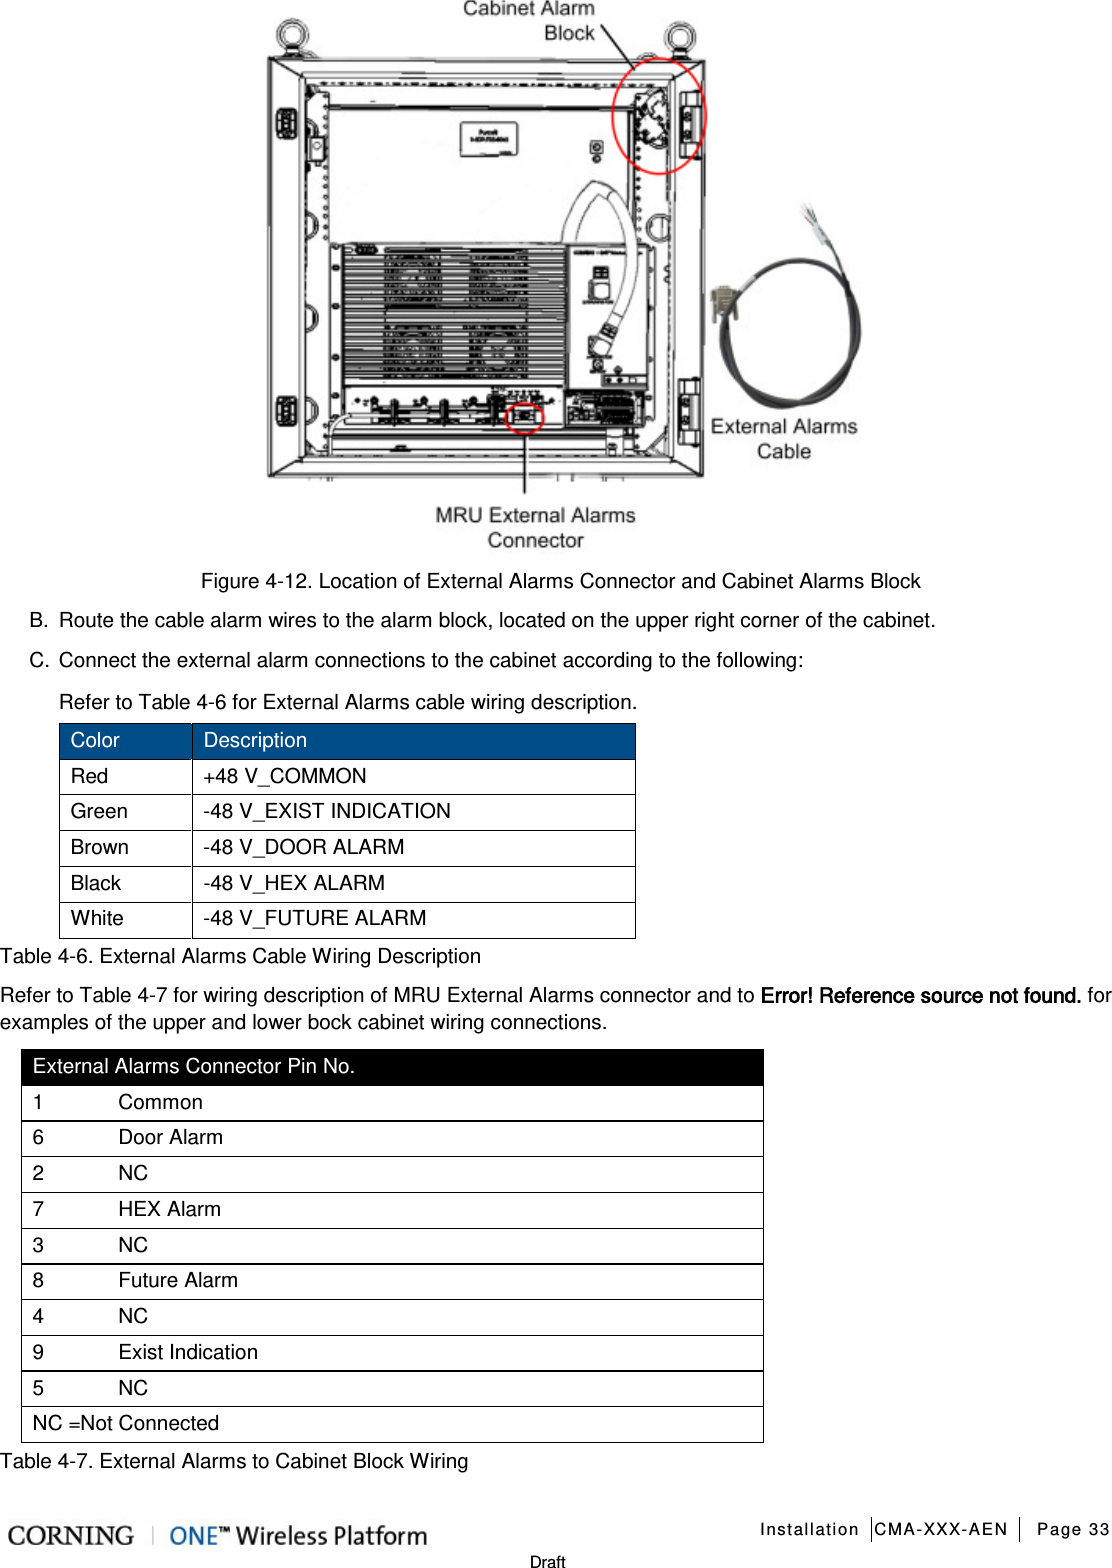   Installation CMA-XXX-AEN Page 33   Draft  Figure  4-12. Location of External Alarms Connector and Cabinet Alarms Block B.  Route the cable alarm wires to the alarm block, located on the upper right corner of the cabinet. C. Connect the external alarm connections to the cabinet according to the following: Refer to Table  4-6 for External Alarms cable wiring description. Color Description Red +48 V_COMMON Green  -48 V_EXIST INDICATION Brown  -48 V_DOOR ALARM Black  -48 V_HEX ALARM White  -48 V_FUTURE ALARM Table  4-6. External Alarms Cable Wiring Description Refer to Table  4-7 for wiring description of MRU External Alarms connector and to Error! Reference source not found. for examples of the upper and lower bock cabinet wiring connections. External Alarms Connector Pin No. 1  Common 6  Door Alarm 2  NC 7  HEX Alarm 3  NC 8  Future Alarm 4  NC 9  Exist Indication 5  NC NC =Not Connected Table  4-7. External Alarms to Cabinet Block Wiring 